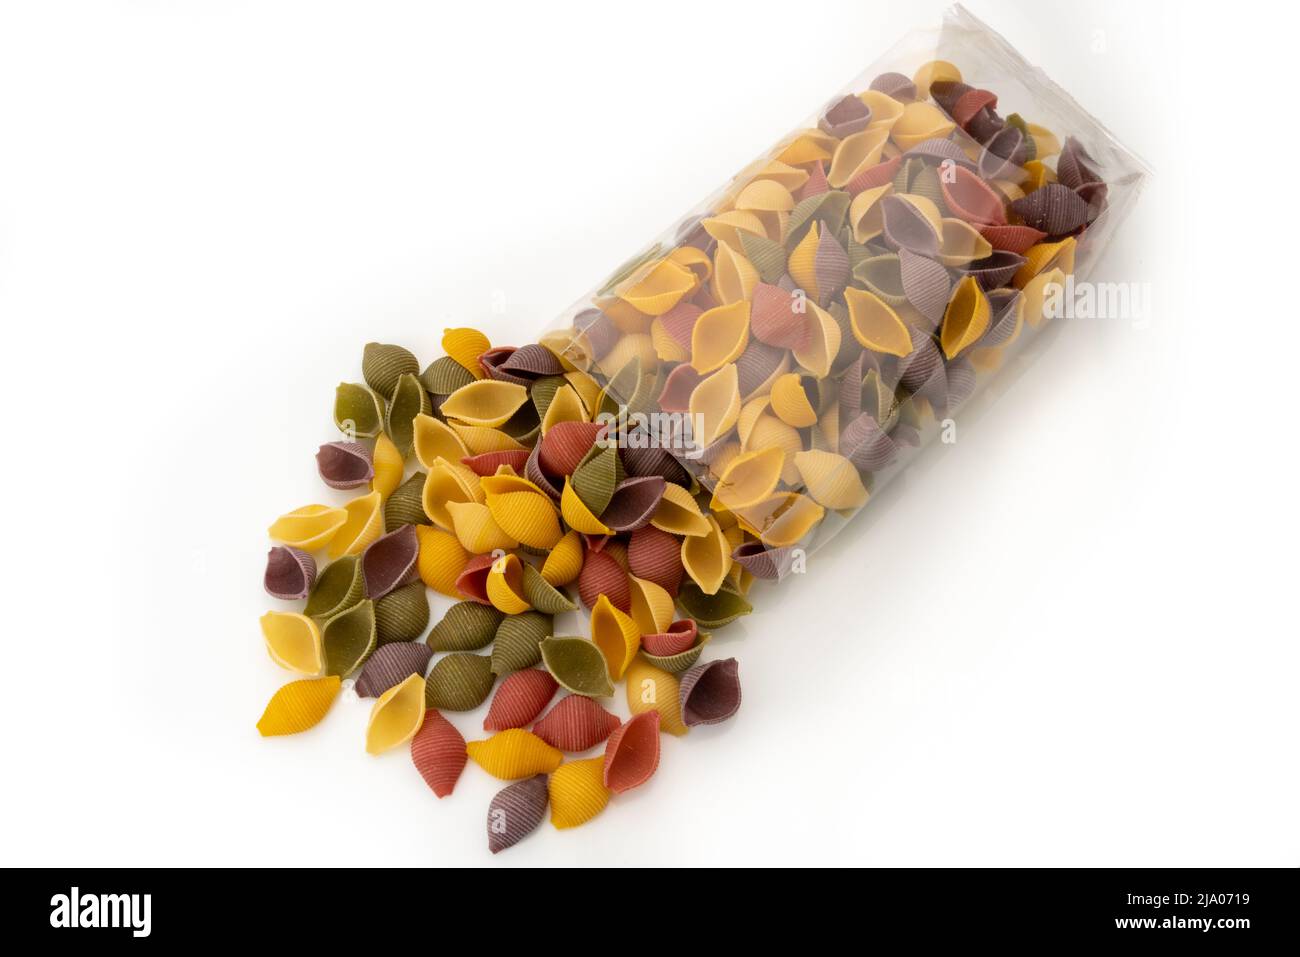 Colored pasta conchigle (shells) that come out of transparent bag, italian durum wheat semolina pasta with turmeric, spinach, beetroot and black carro Stock Photo